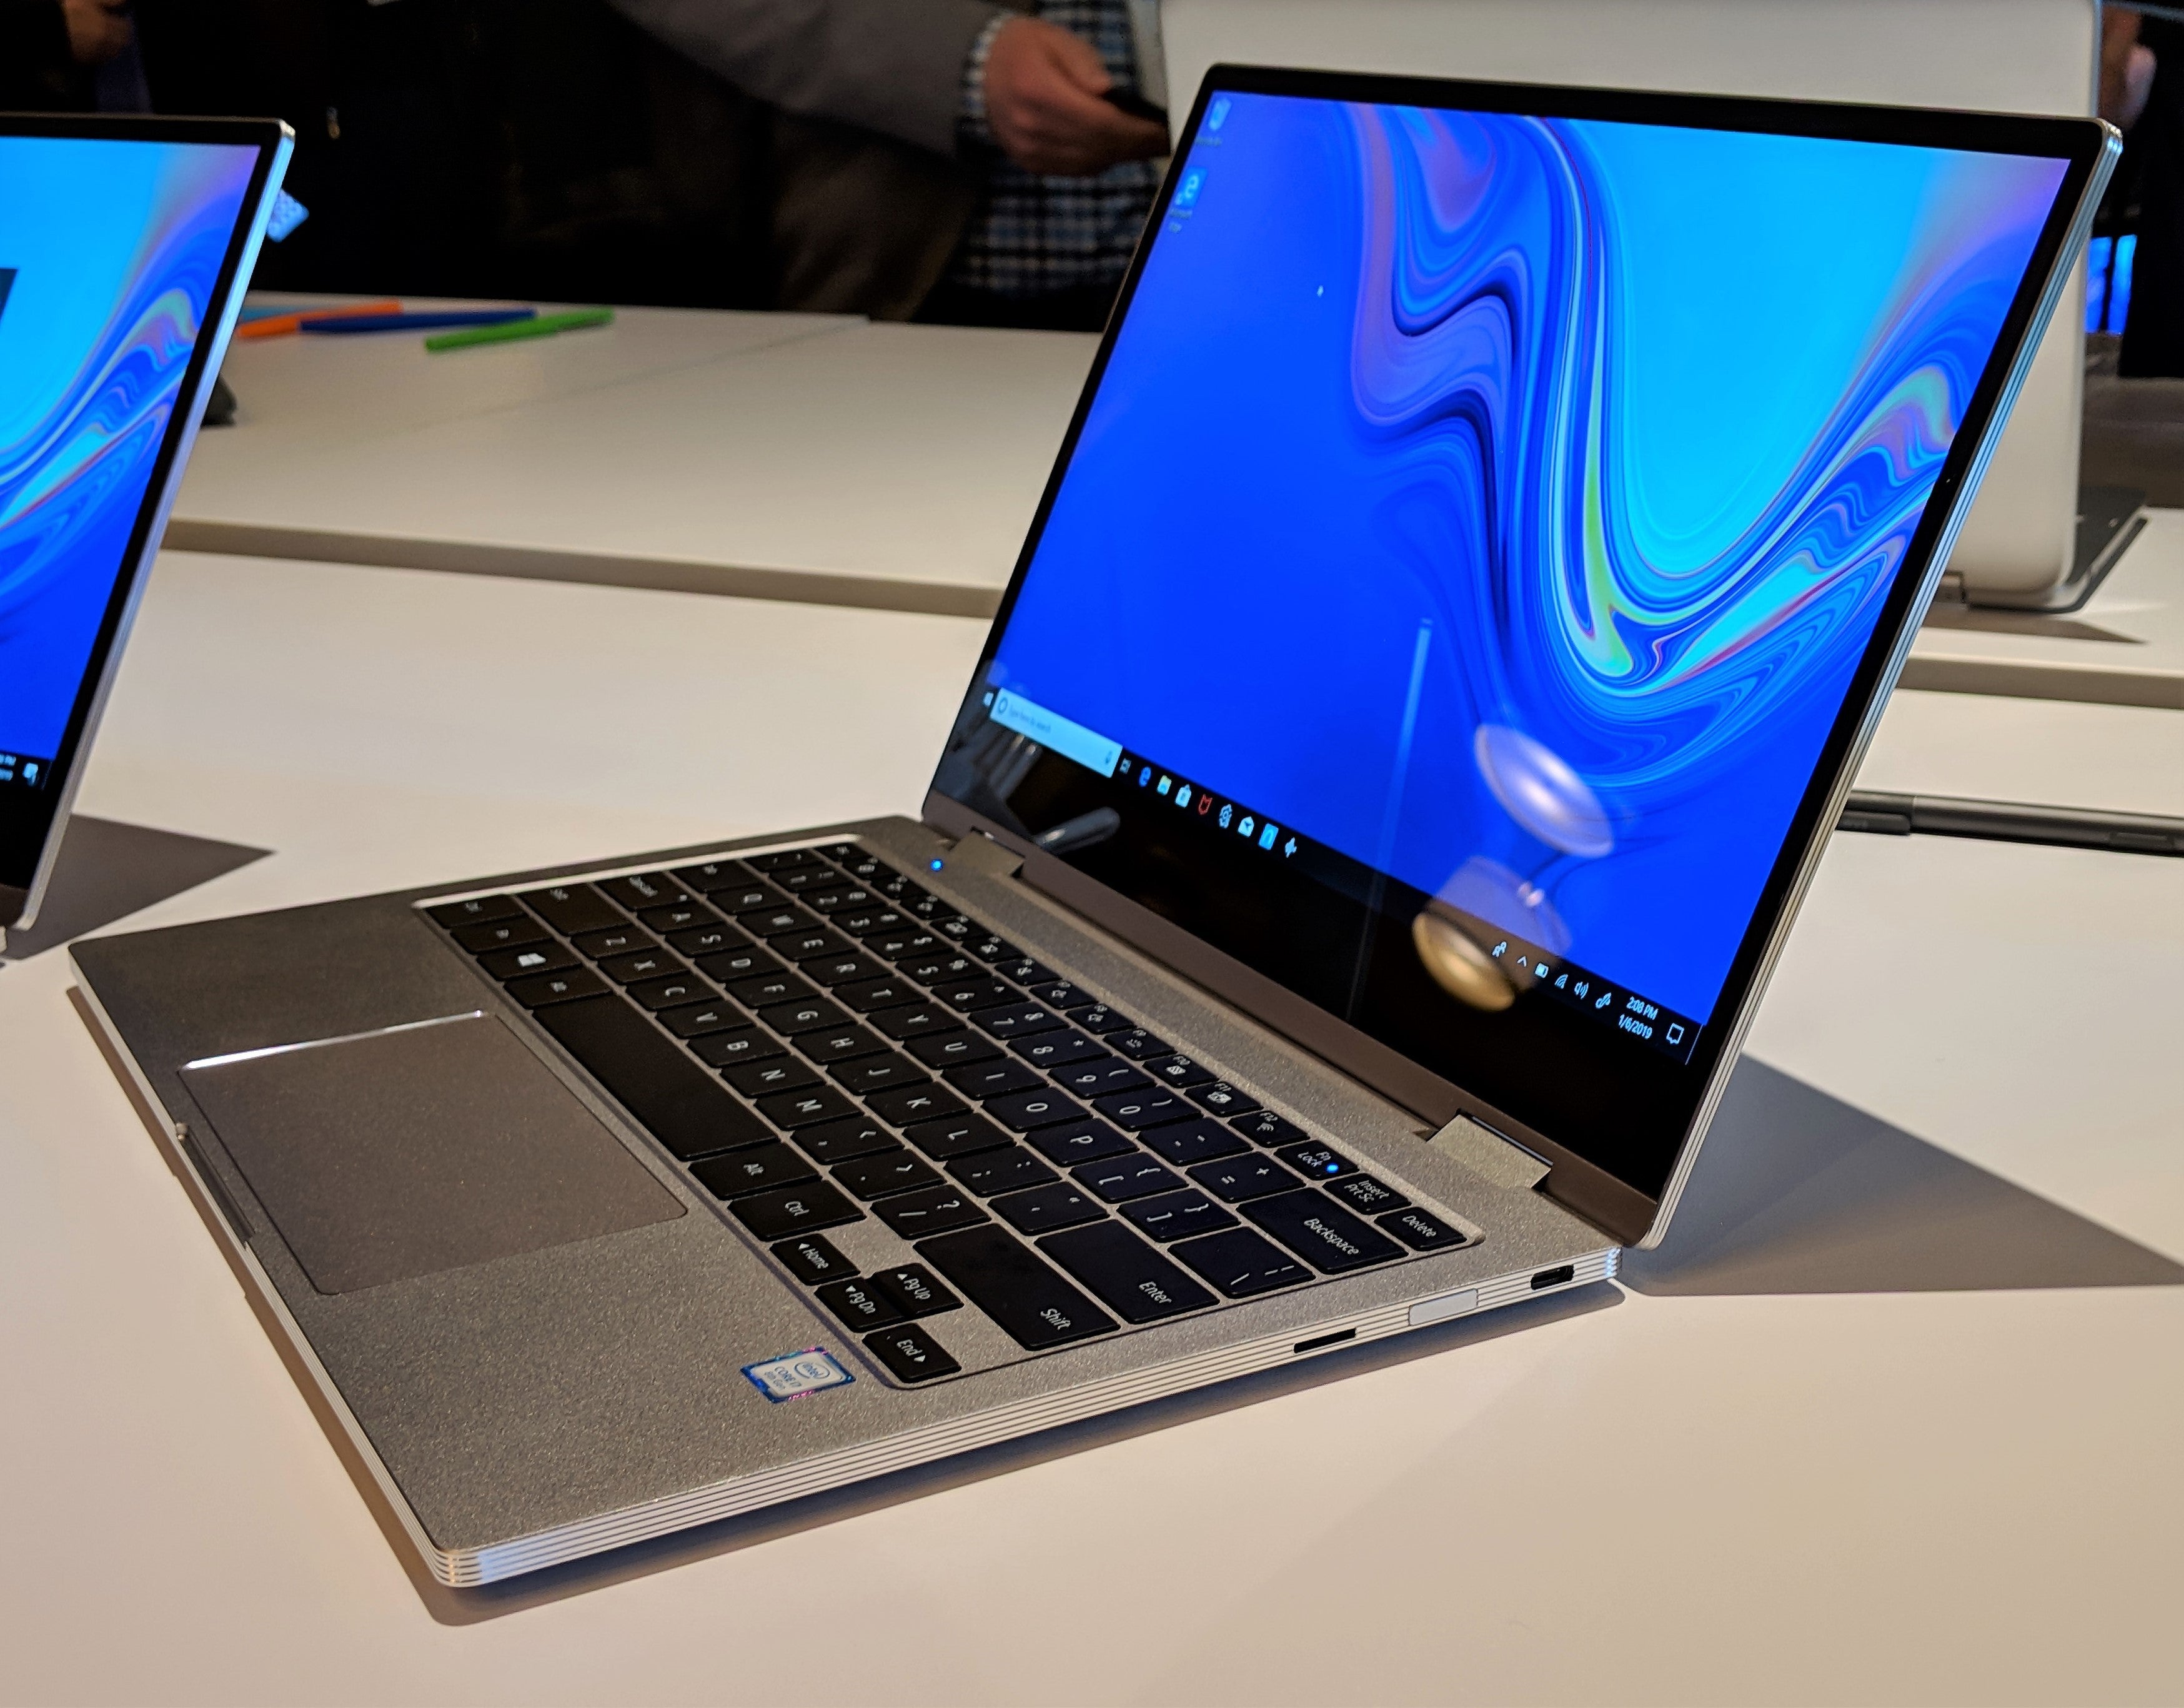 Samsung Notebook 7 Spin (2018) Image